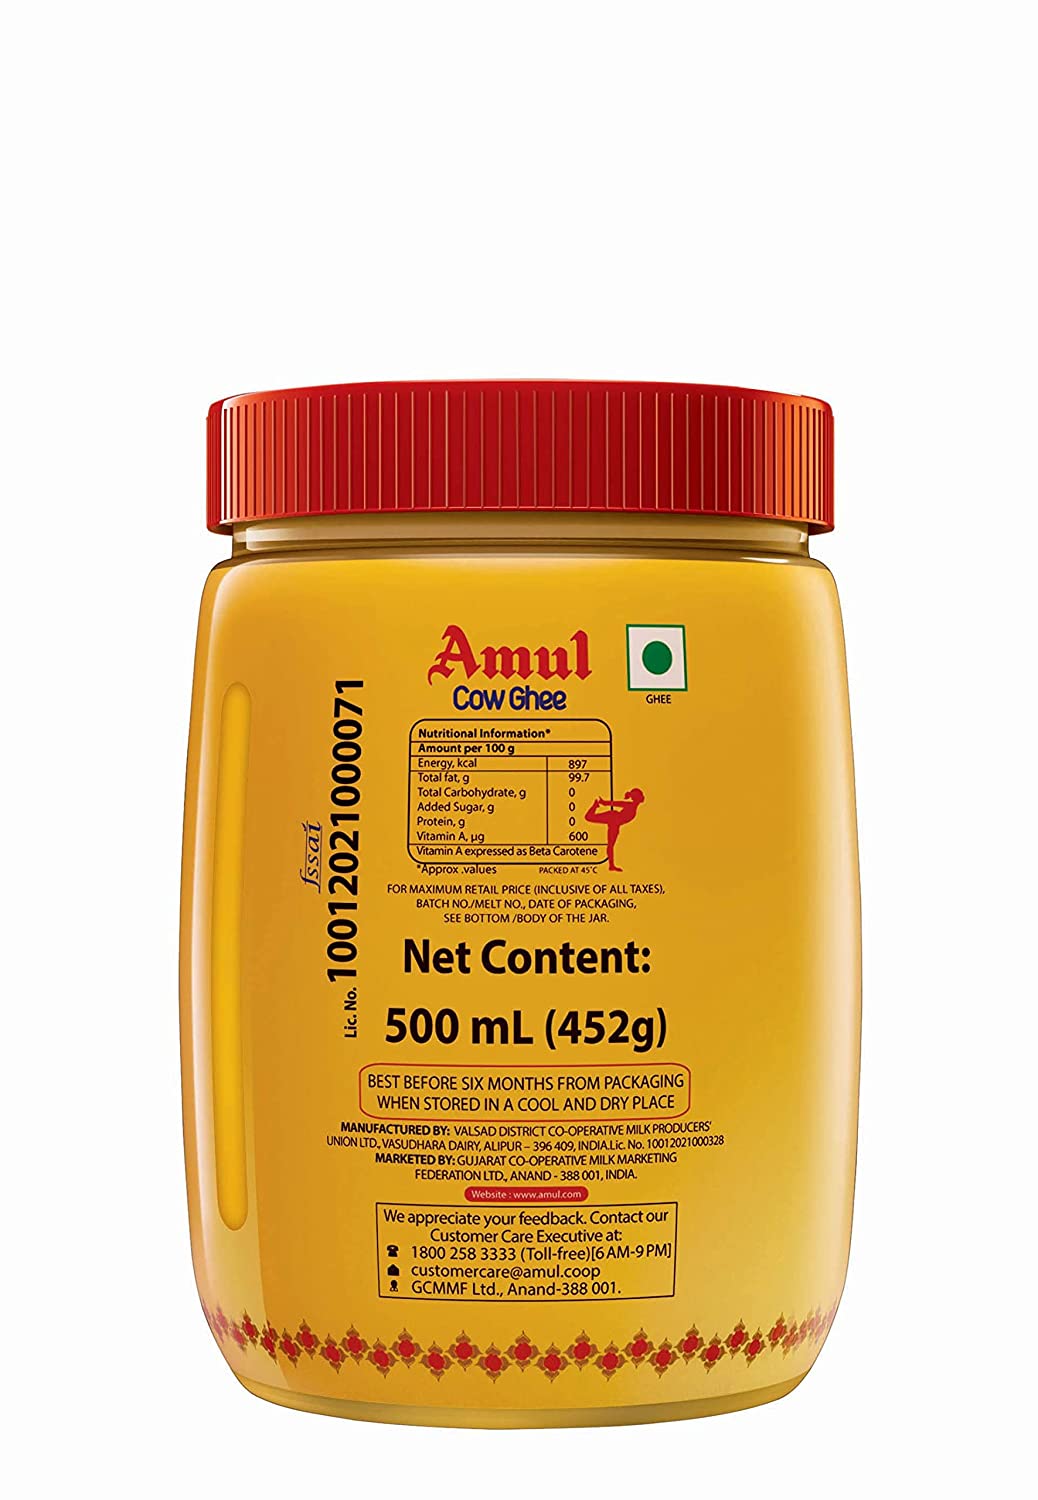 Amul High Aroma Cow Ghee 500mL (Pack of 2), 1 L